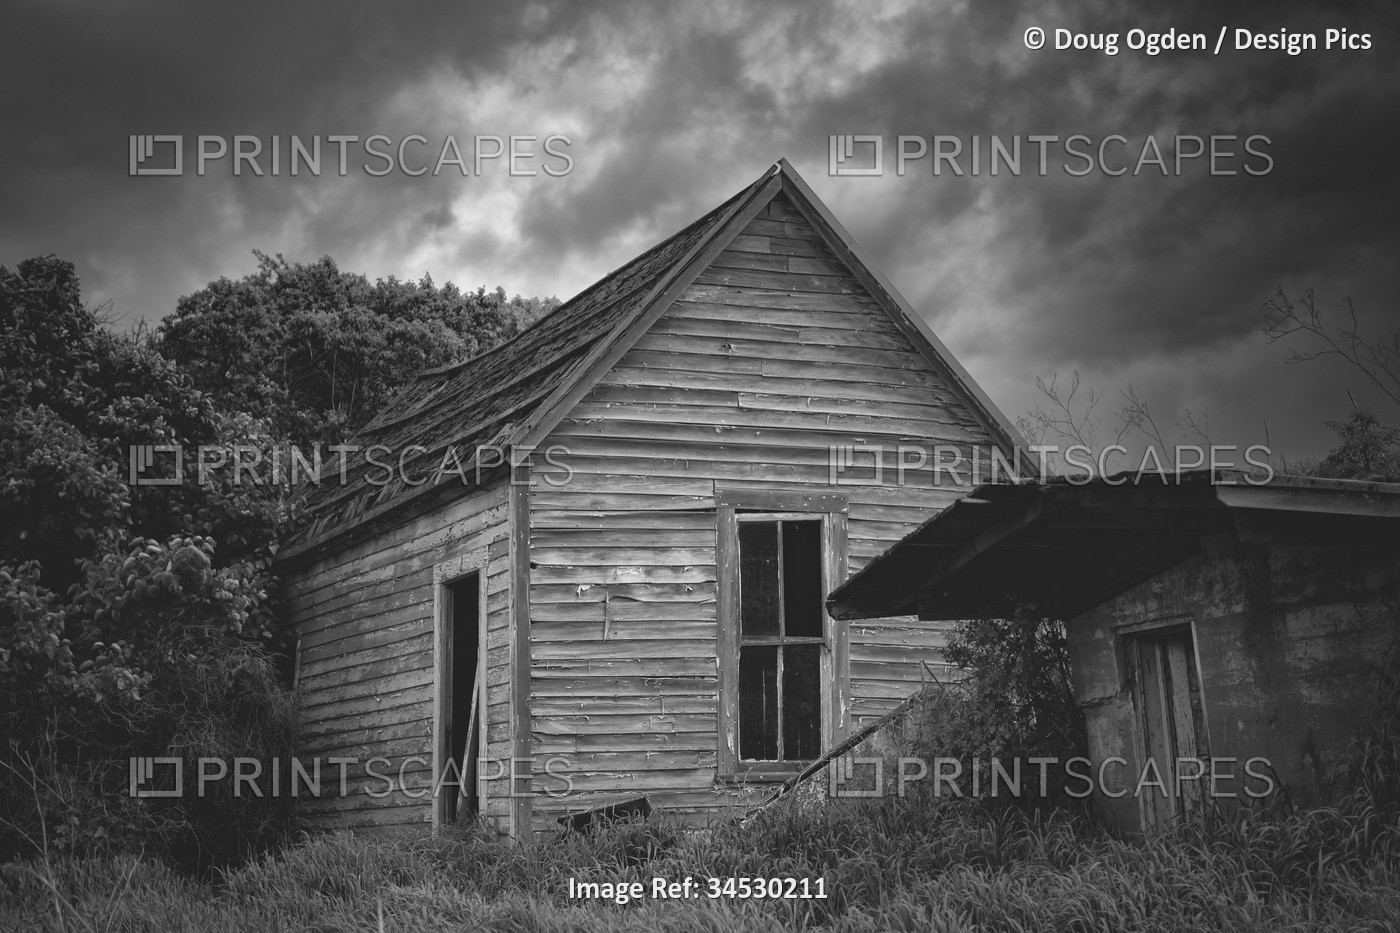 Black and white image of a spooky old abandoned house under threatening weather ...